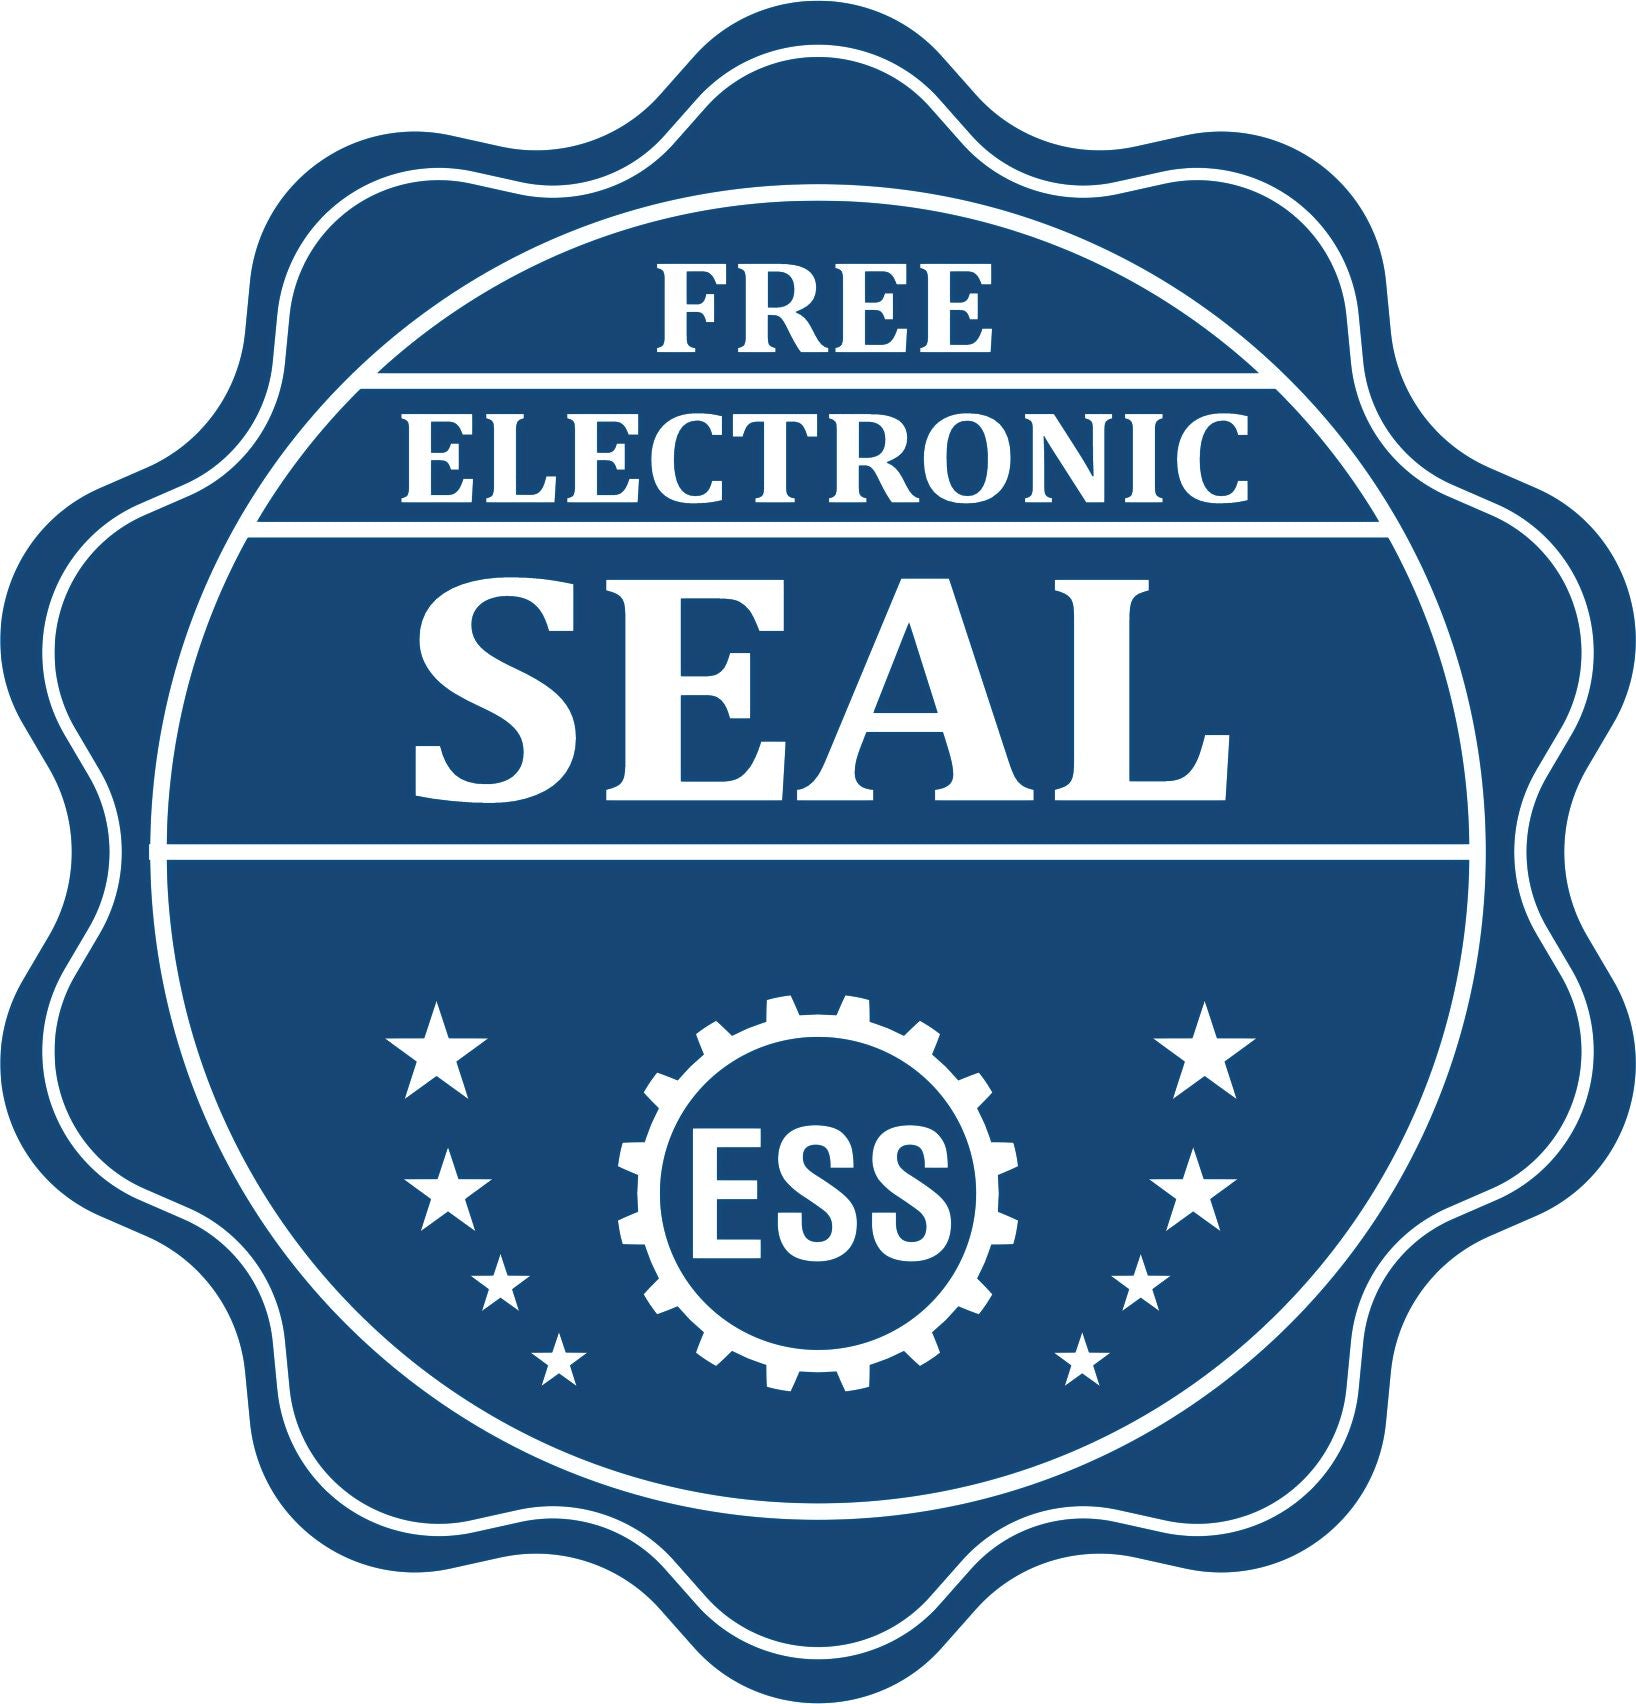 A badge showing a free electronic seal for the Slim Pre-Inked Maine Land Surveyor Seal Stamp with stars and the ESS gear on the emblem.